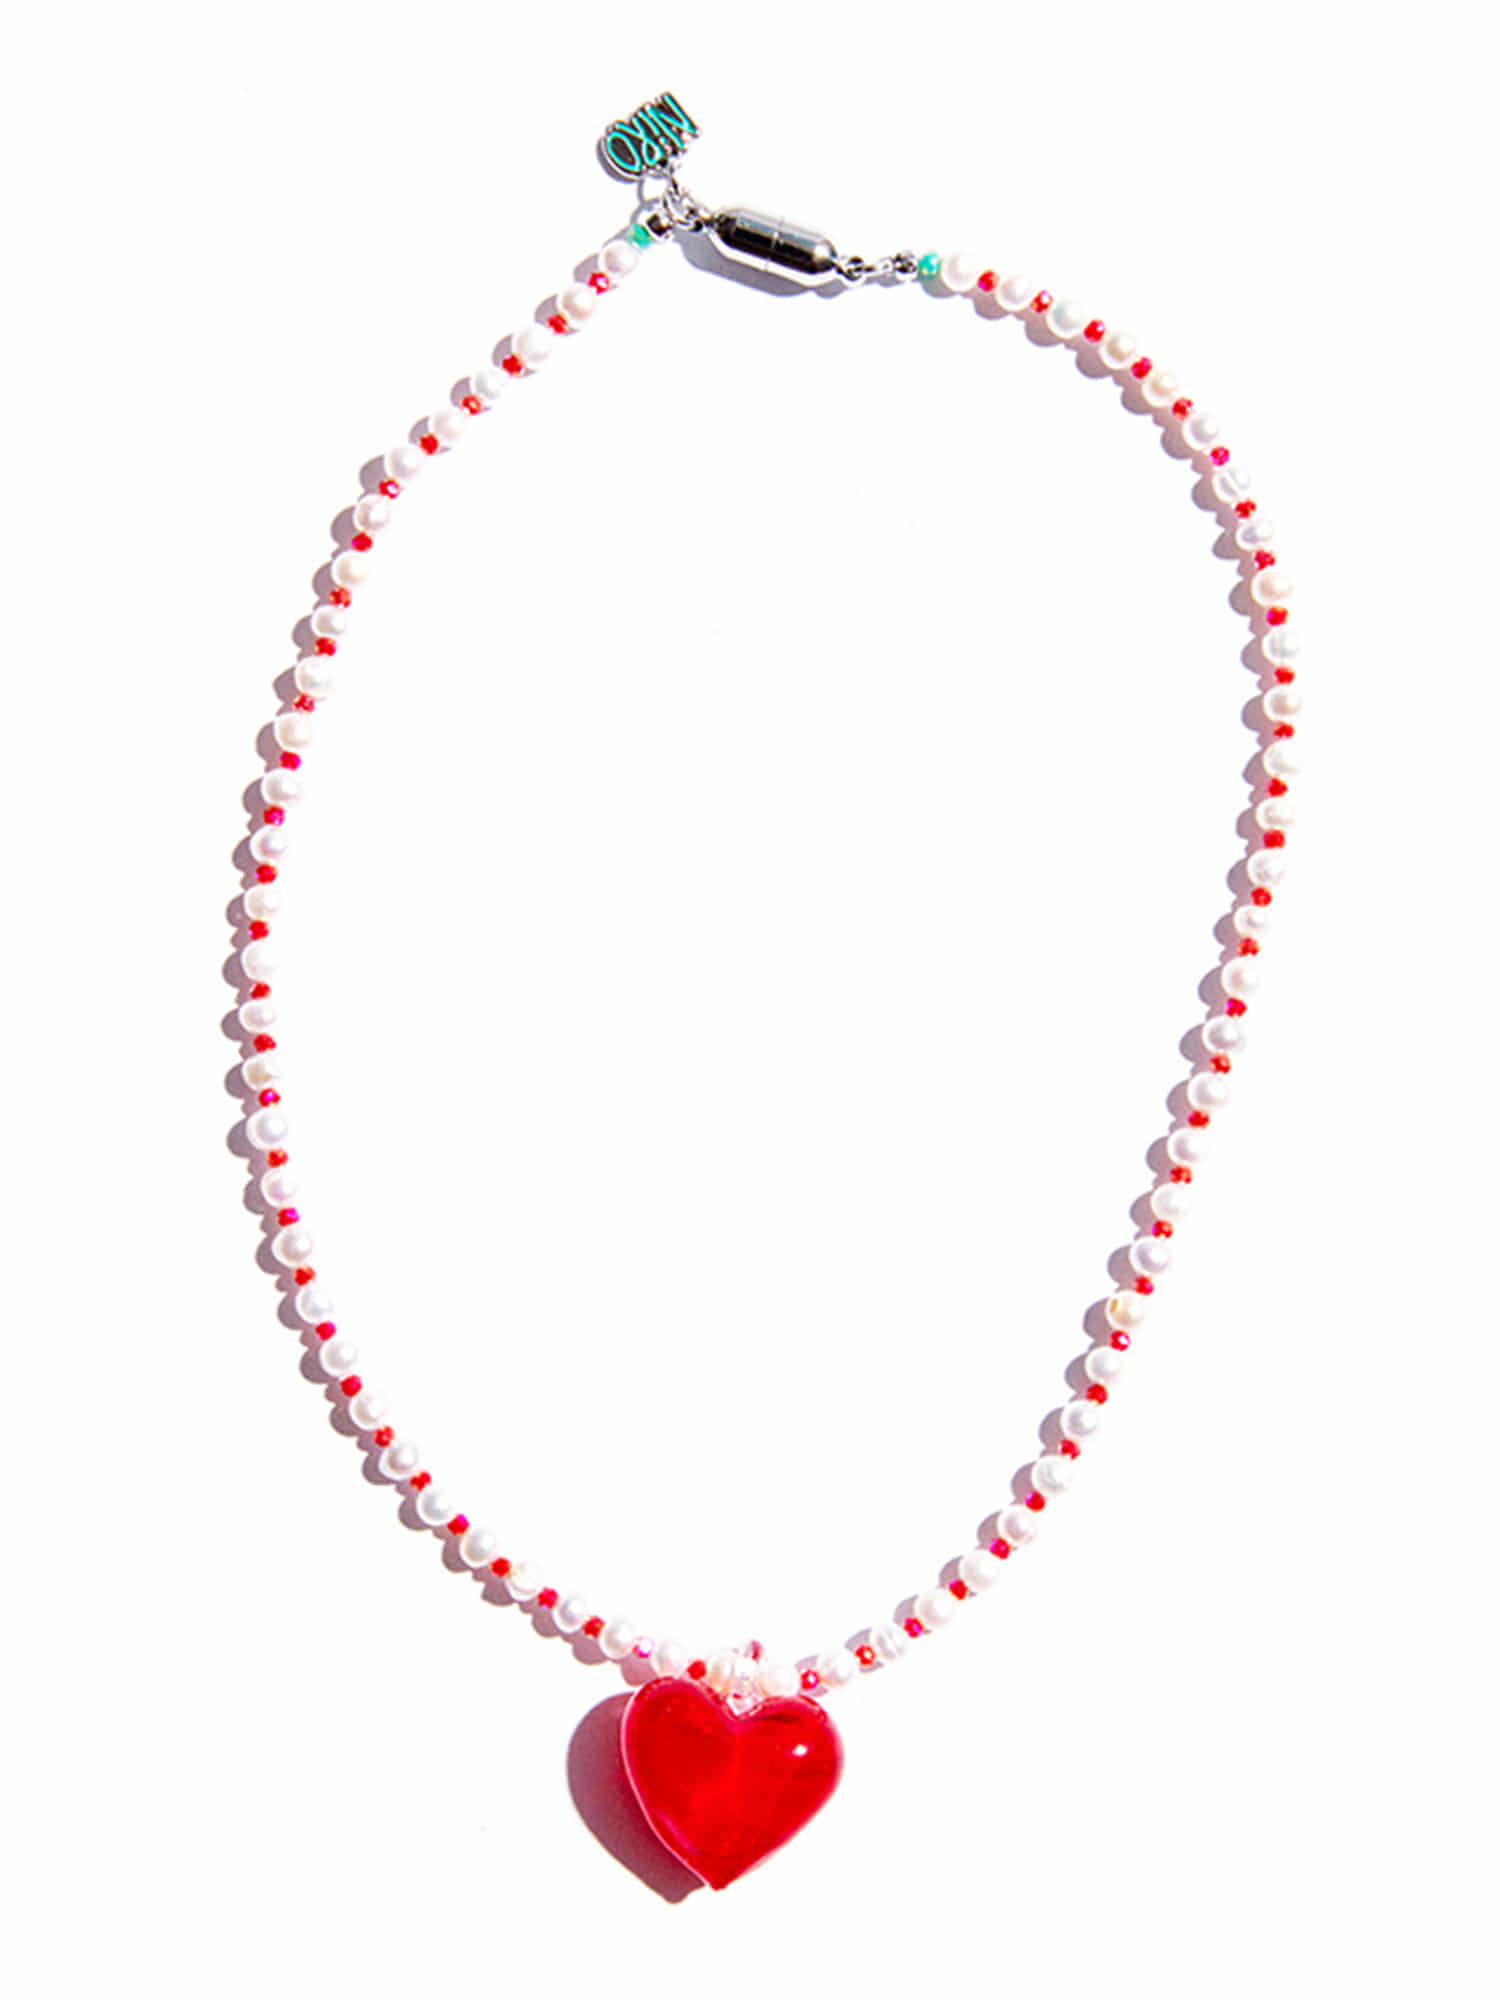 Red Heart Beads Pearl Necklace #73